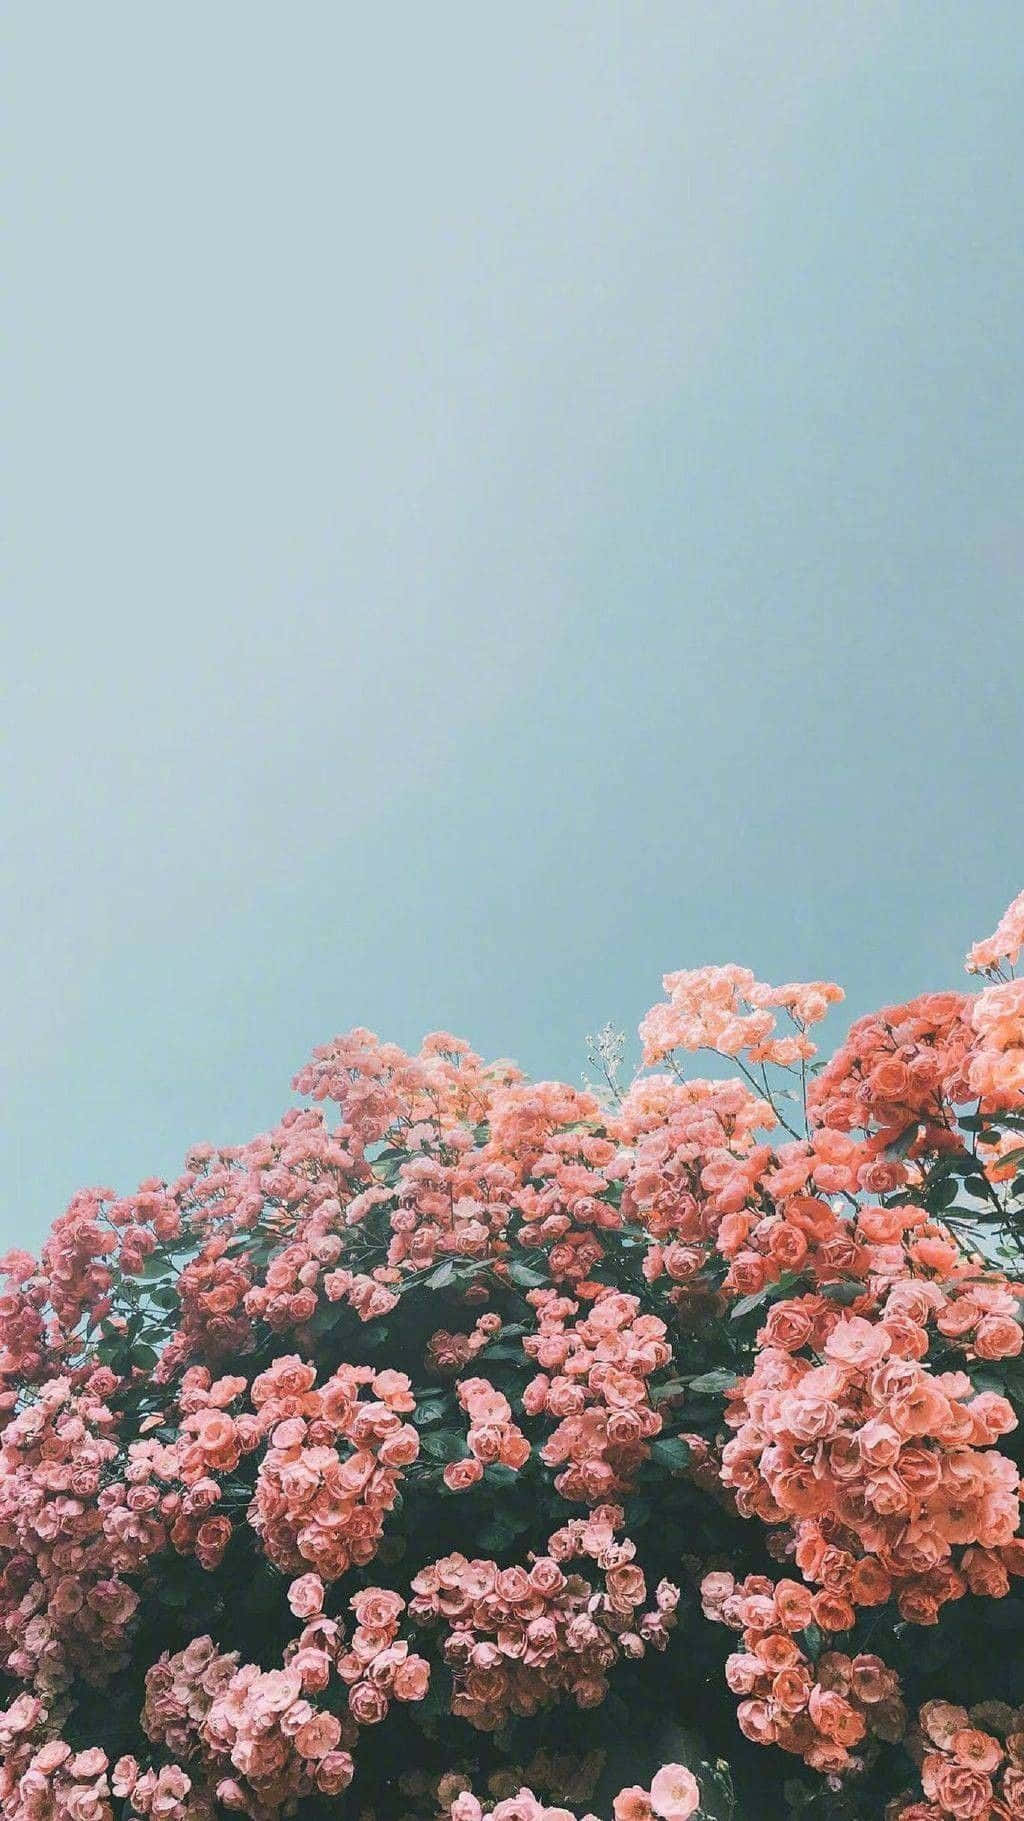 Enjoy a beautiful combination of colors and shapes with this delicate floral aesthetic iPhone wallpaper. Wallpaper